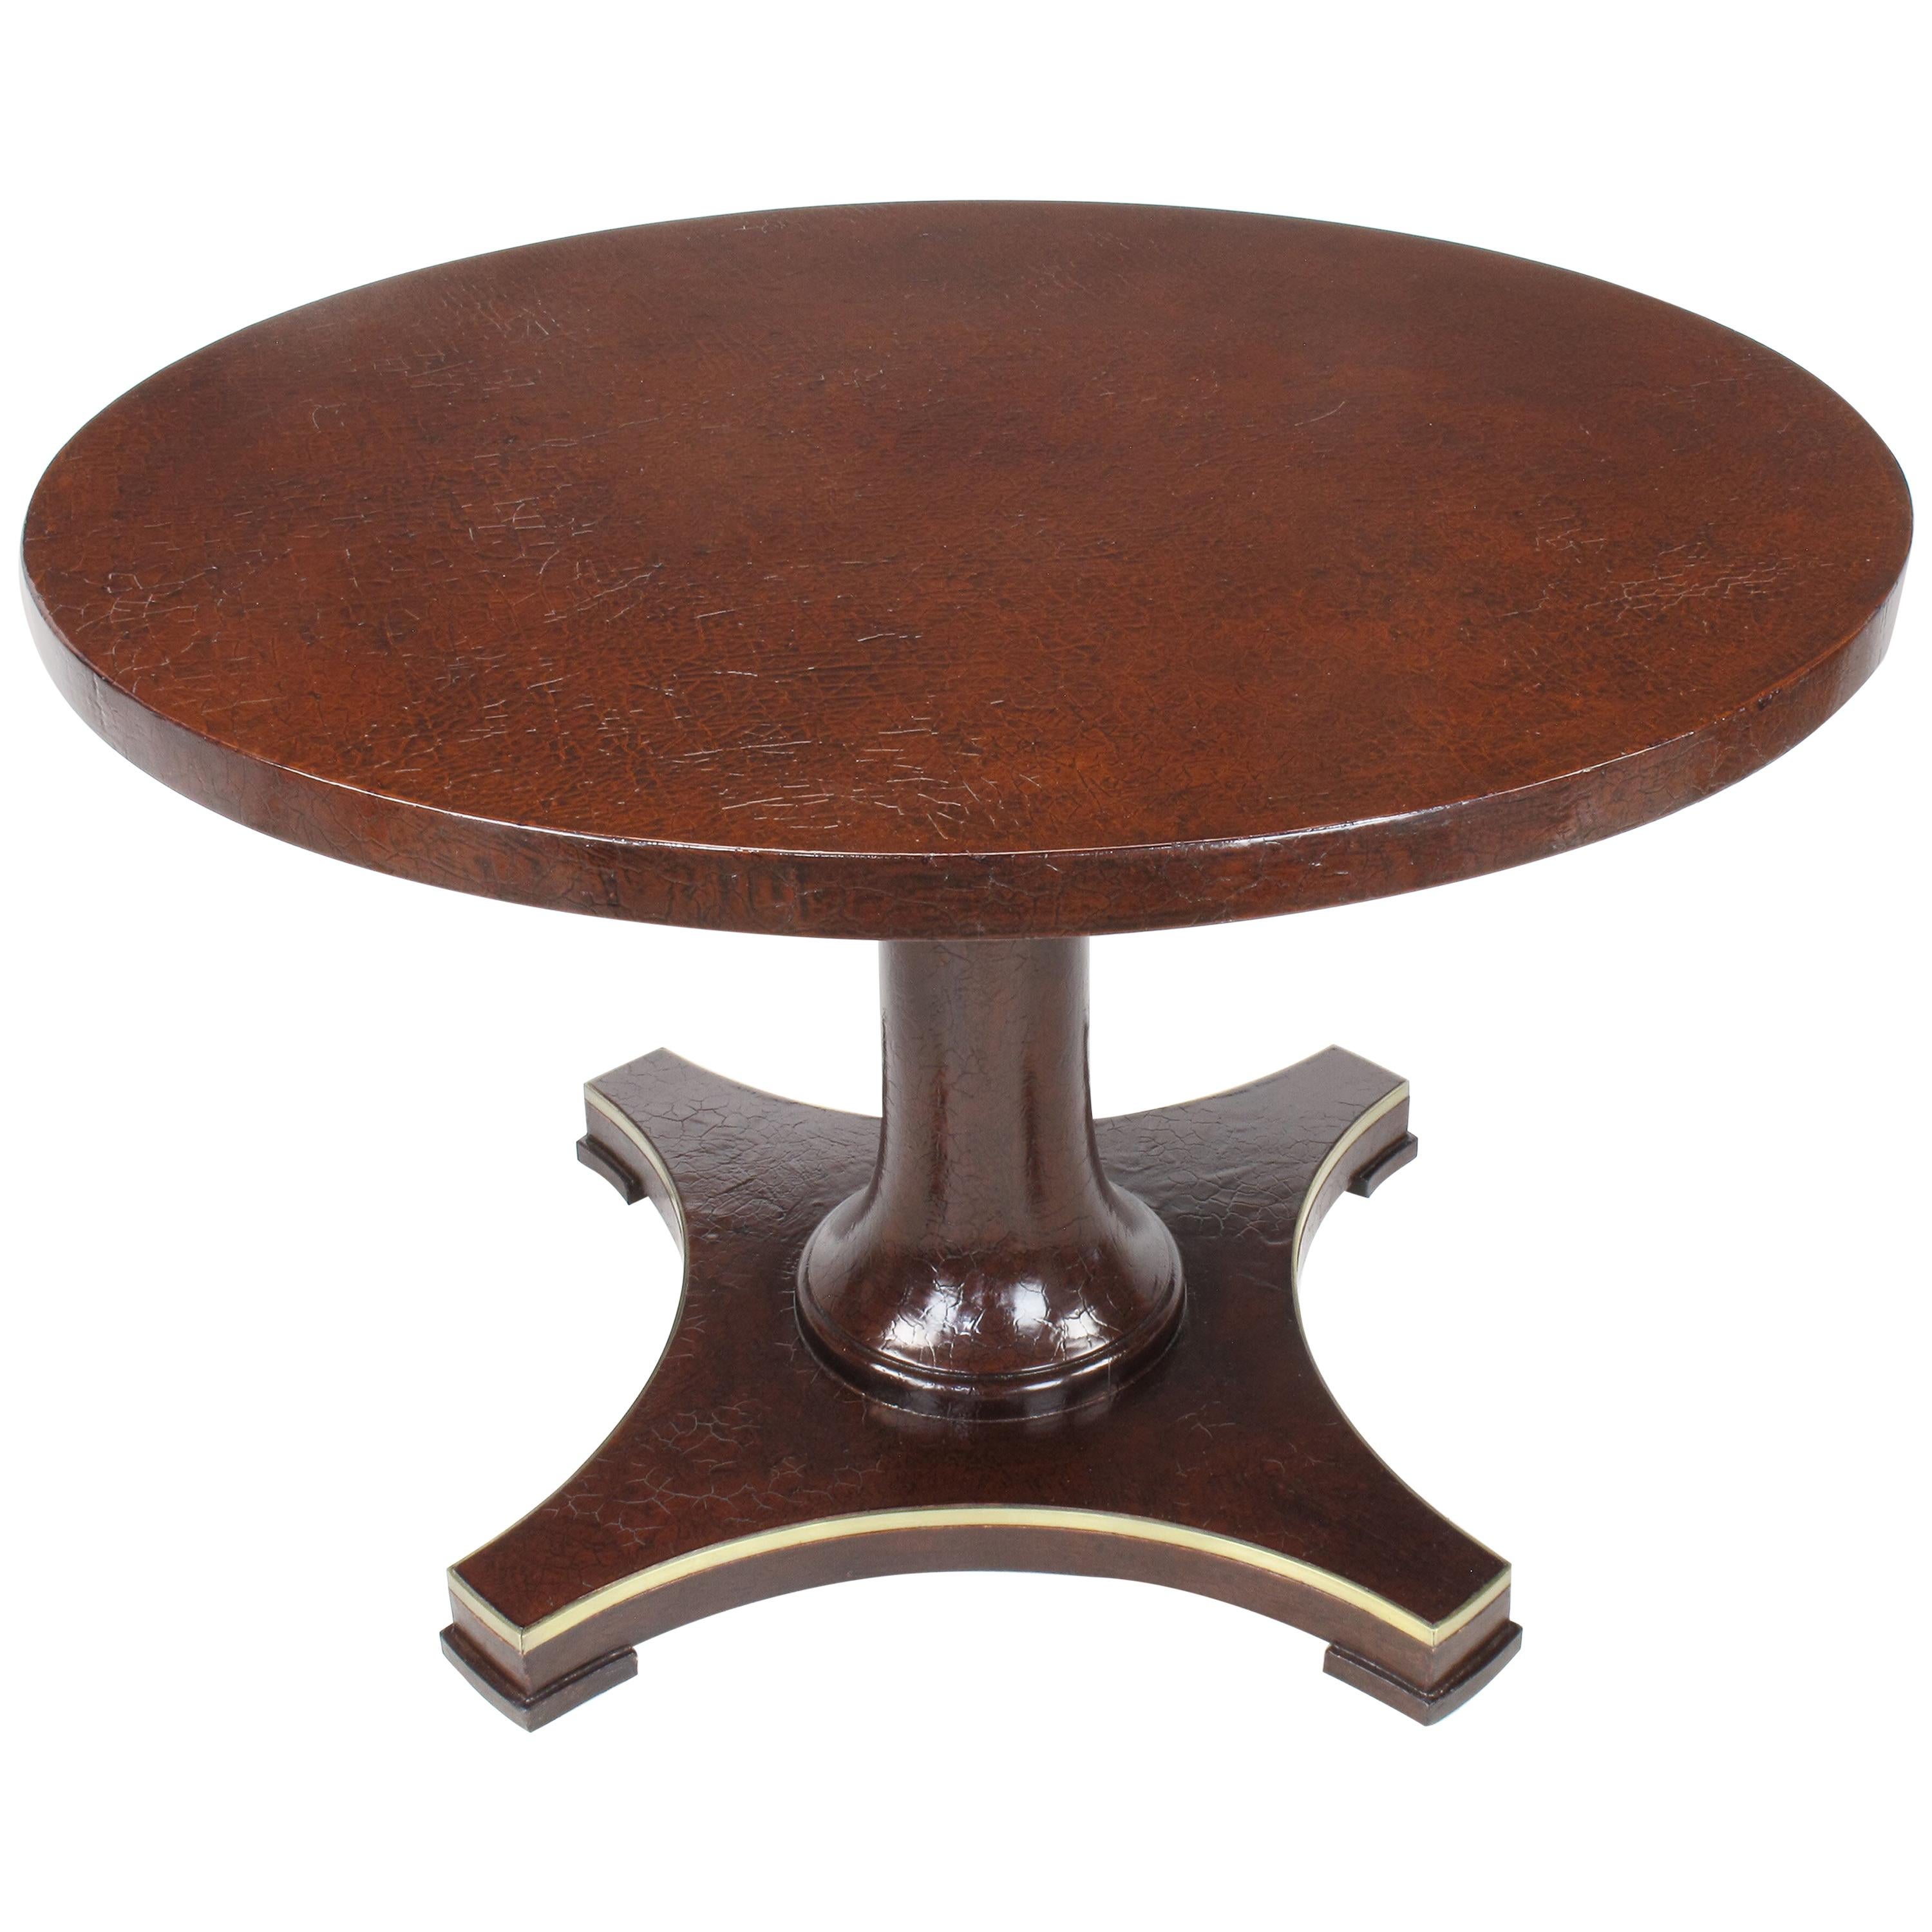 Baker Furniture Pedestal Games Table with Craquelure Finish For Sale